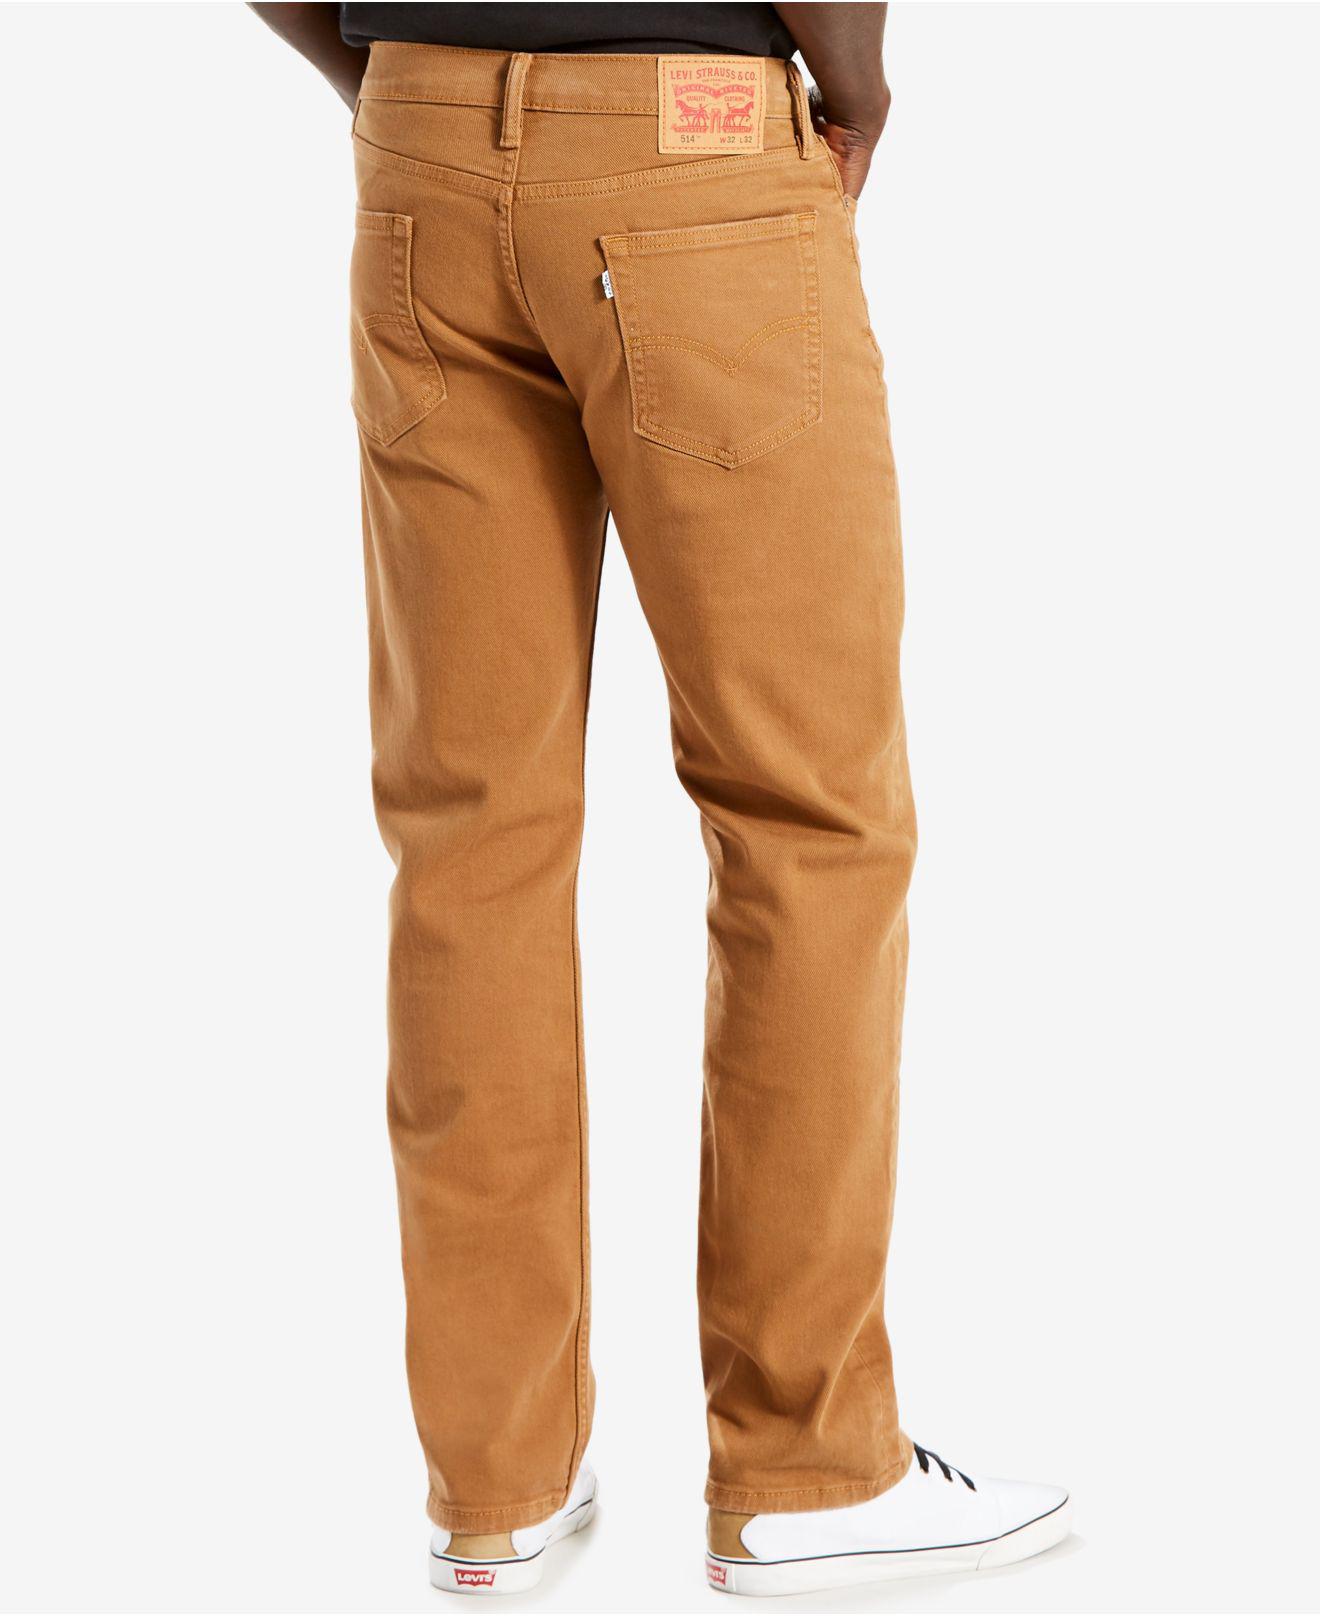 levis mustard jeans Cheaper Than Retail 